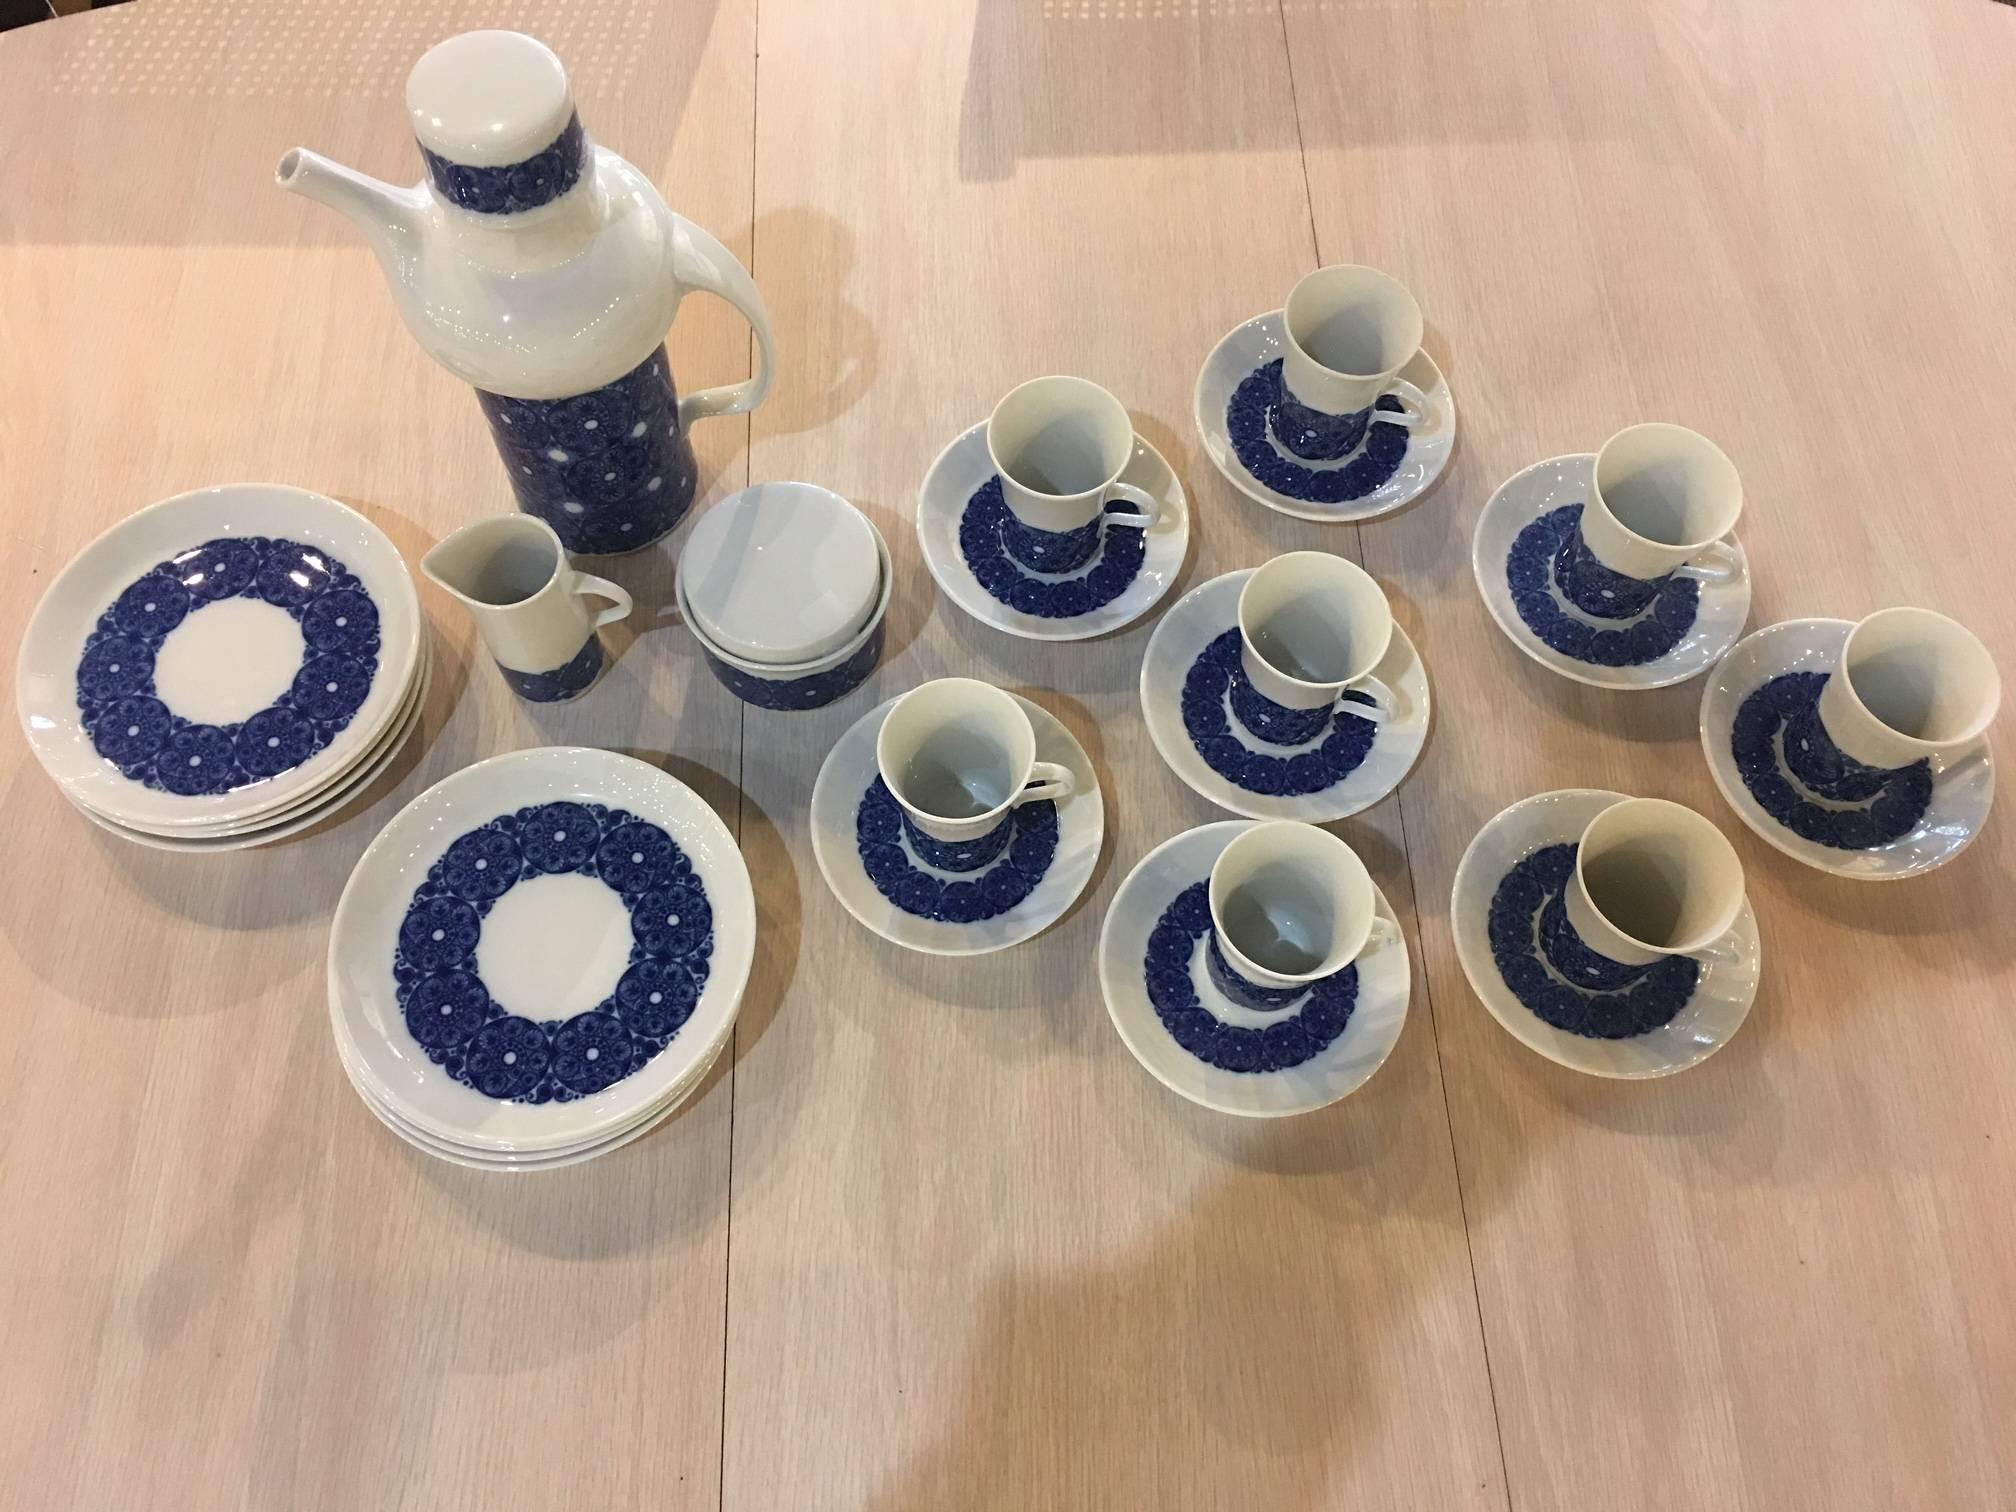 Designed by Marianne Westman for Rörstrand, 1950s design Classic Mon Amie in high quality porcelain. Famous blue flower pattern. Swedish Classic, 'Mon amie', by Rörstrand was launched in 1952. The story goes that designer Marianne Westman